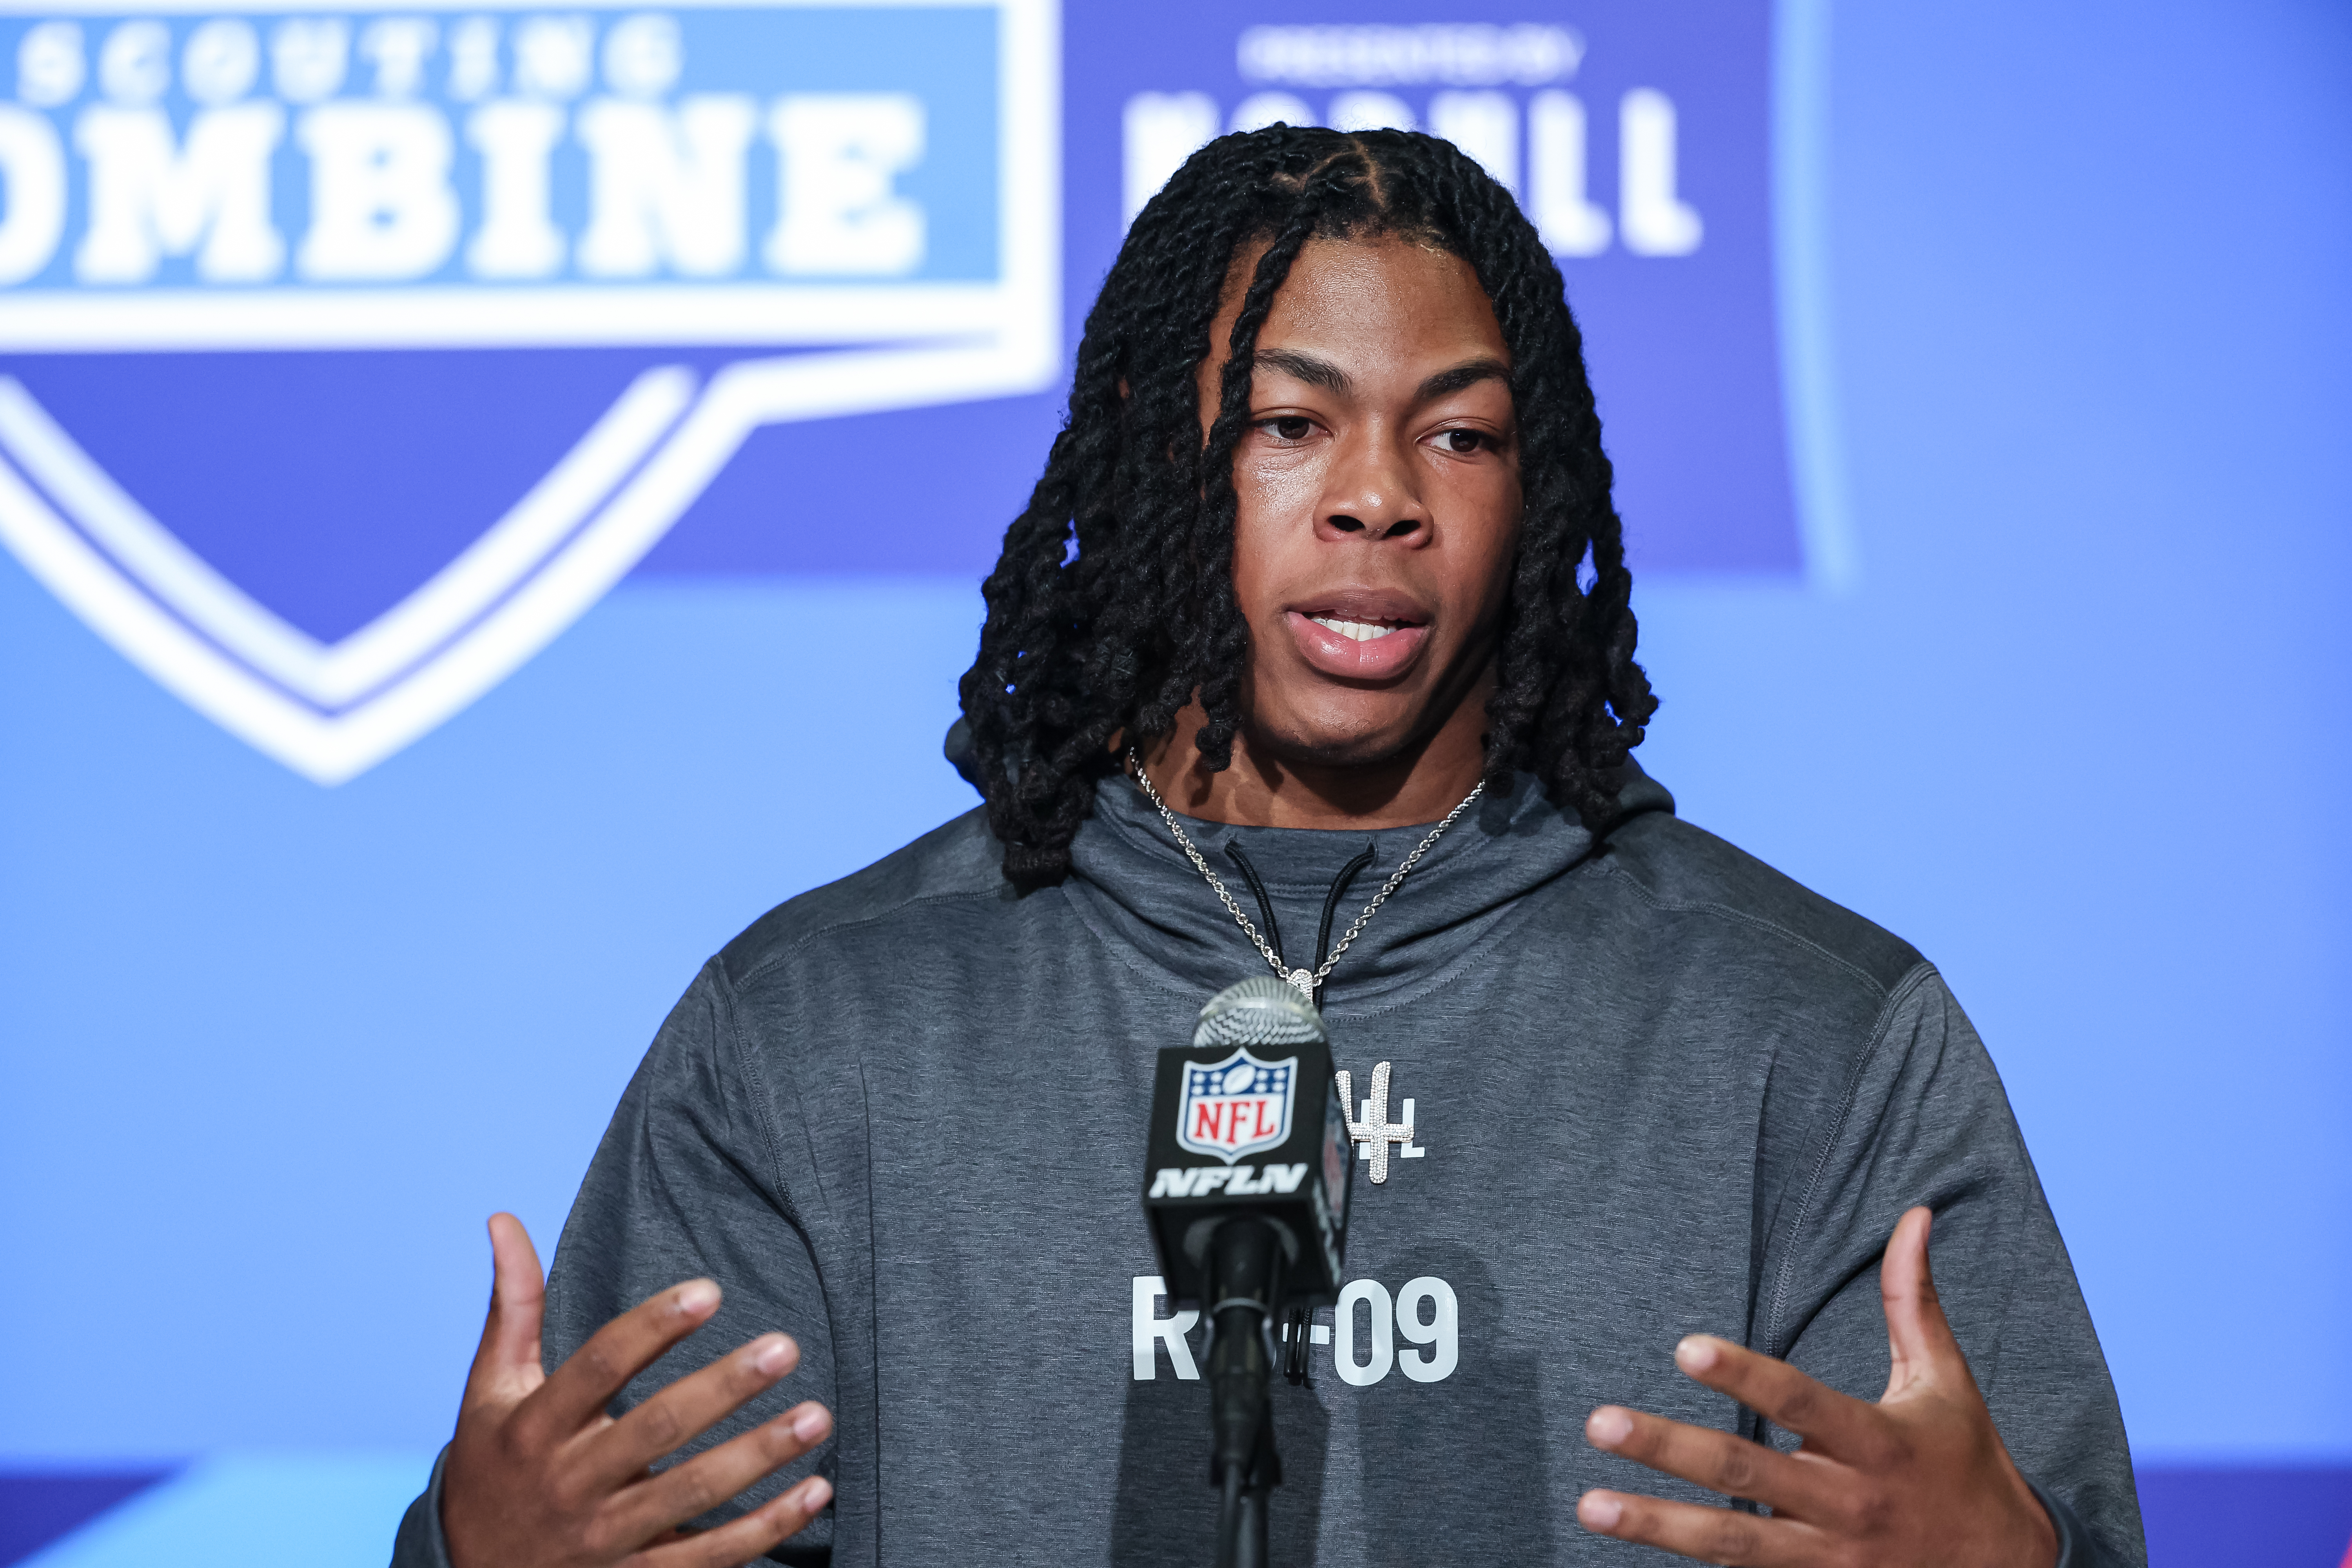 Running back Jahmyr Gibbs of Alabama speaks to the media during the NFL Combine at Lucas Oil Stadium on March 4, 2023 in Indianapolis, Indiana.